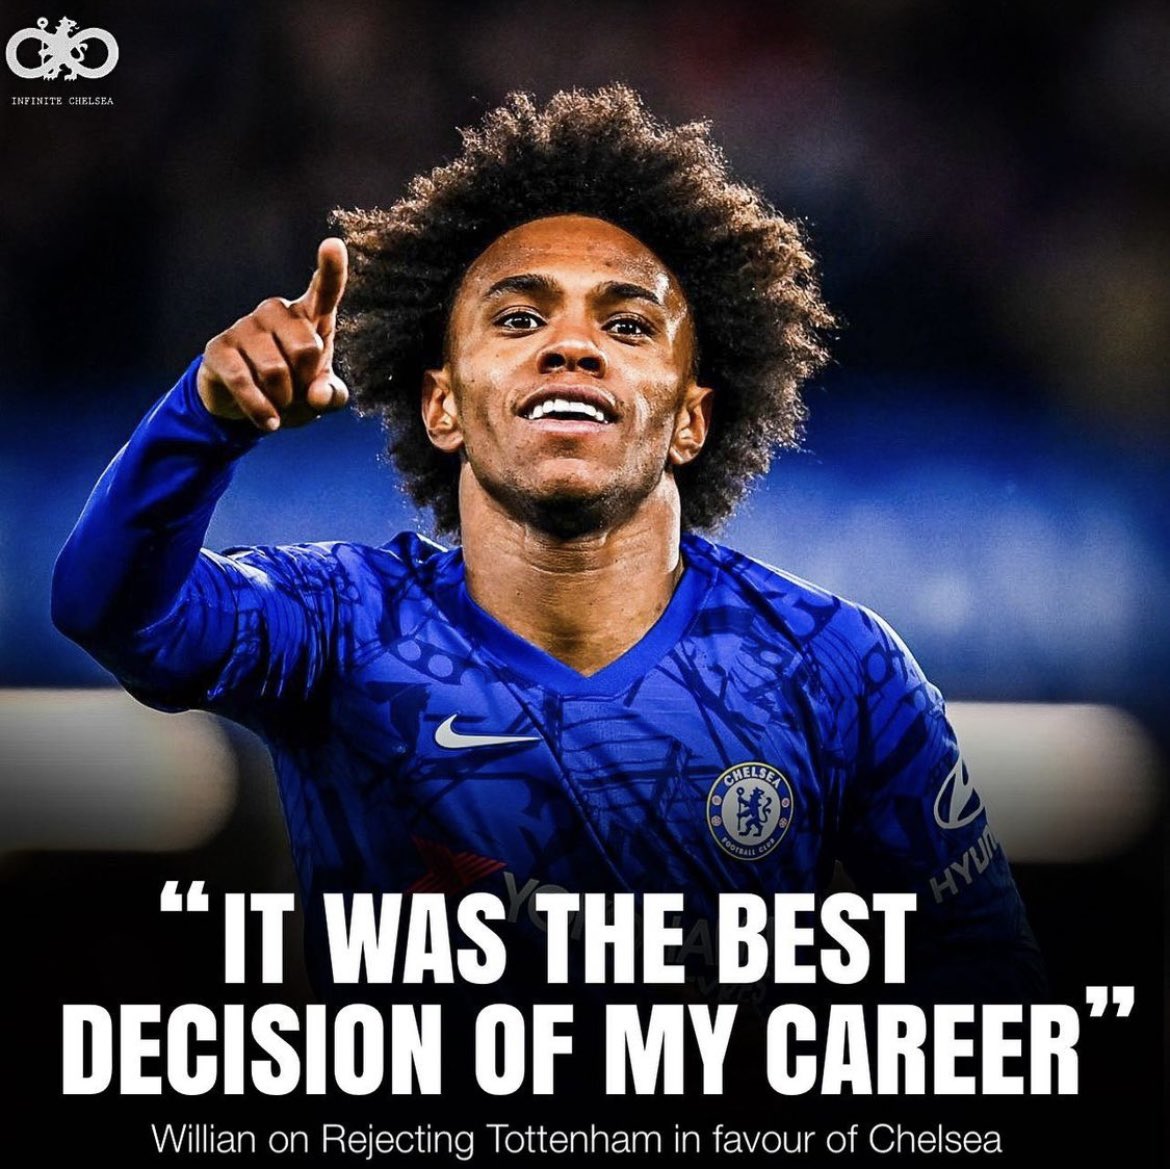 RT @FrankKhalidUK: Willian talking about the decision to join Chelsea instead of Spurs. https://t.co/aIAGp521kl